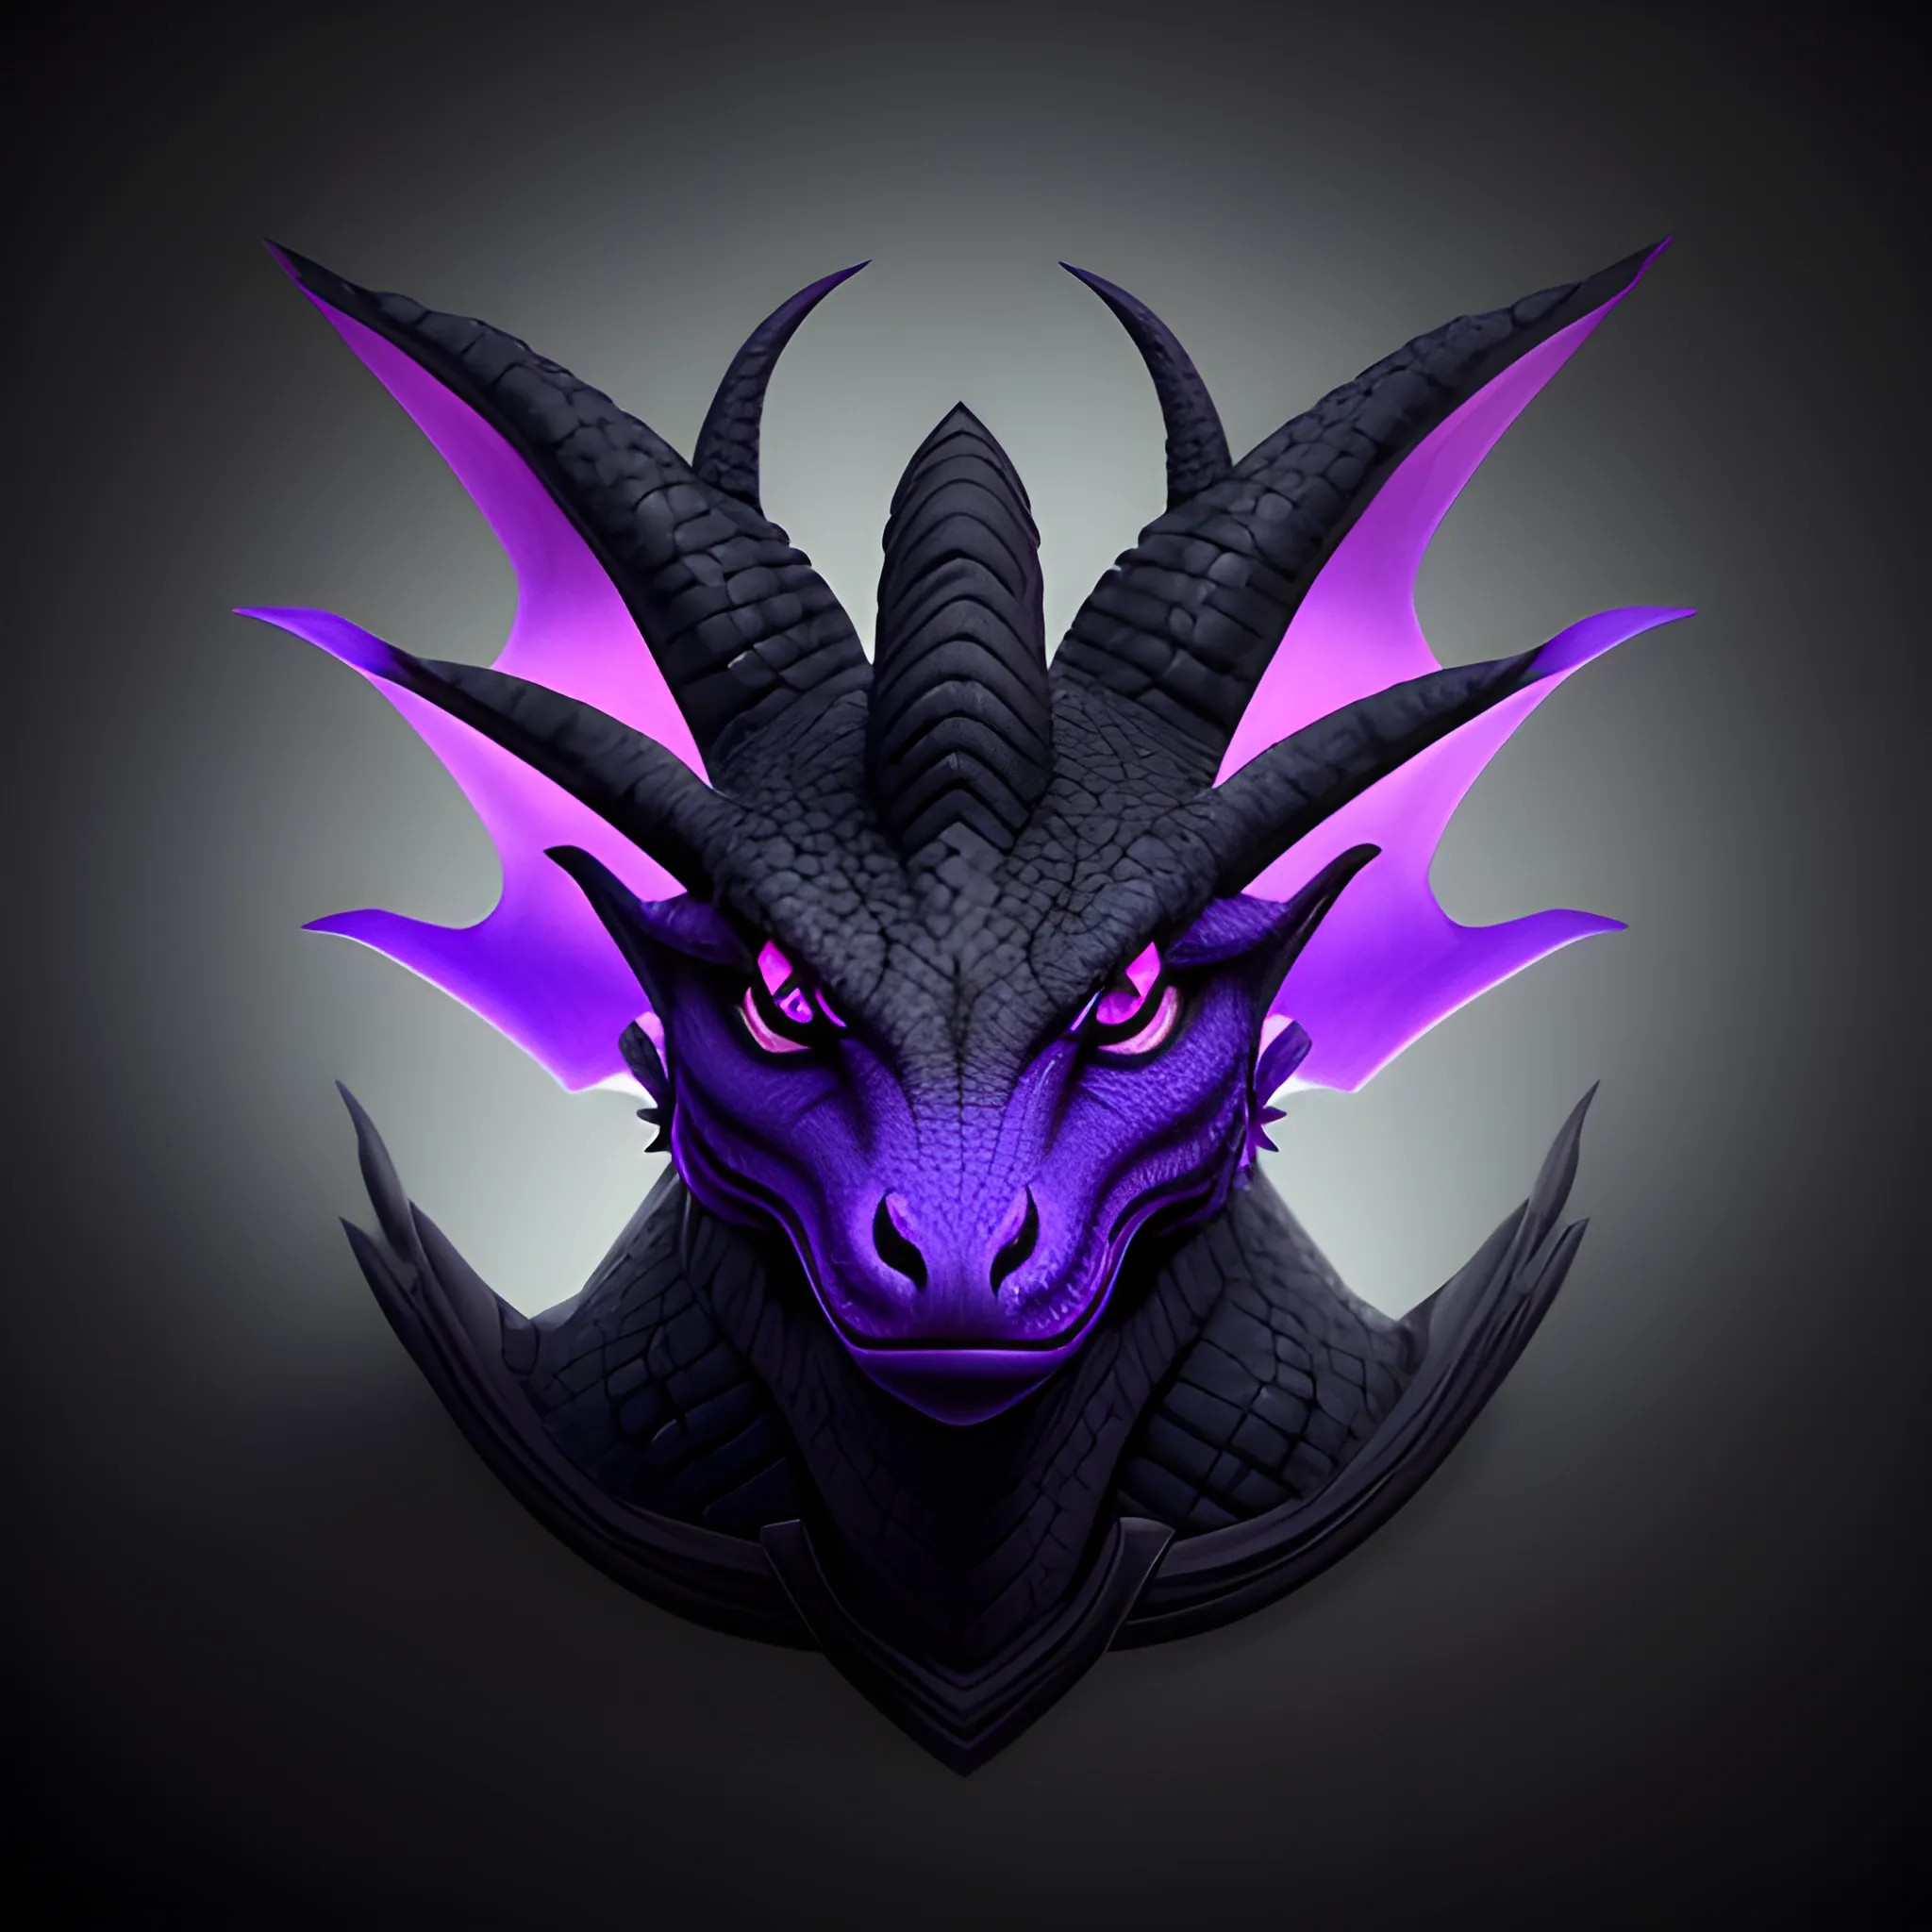 a stylized image of a dragon with purple eyes on a black background, an ambient occlusion render by Xul Solar, reddit contest winner, lyco art, elite, logo, black background
